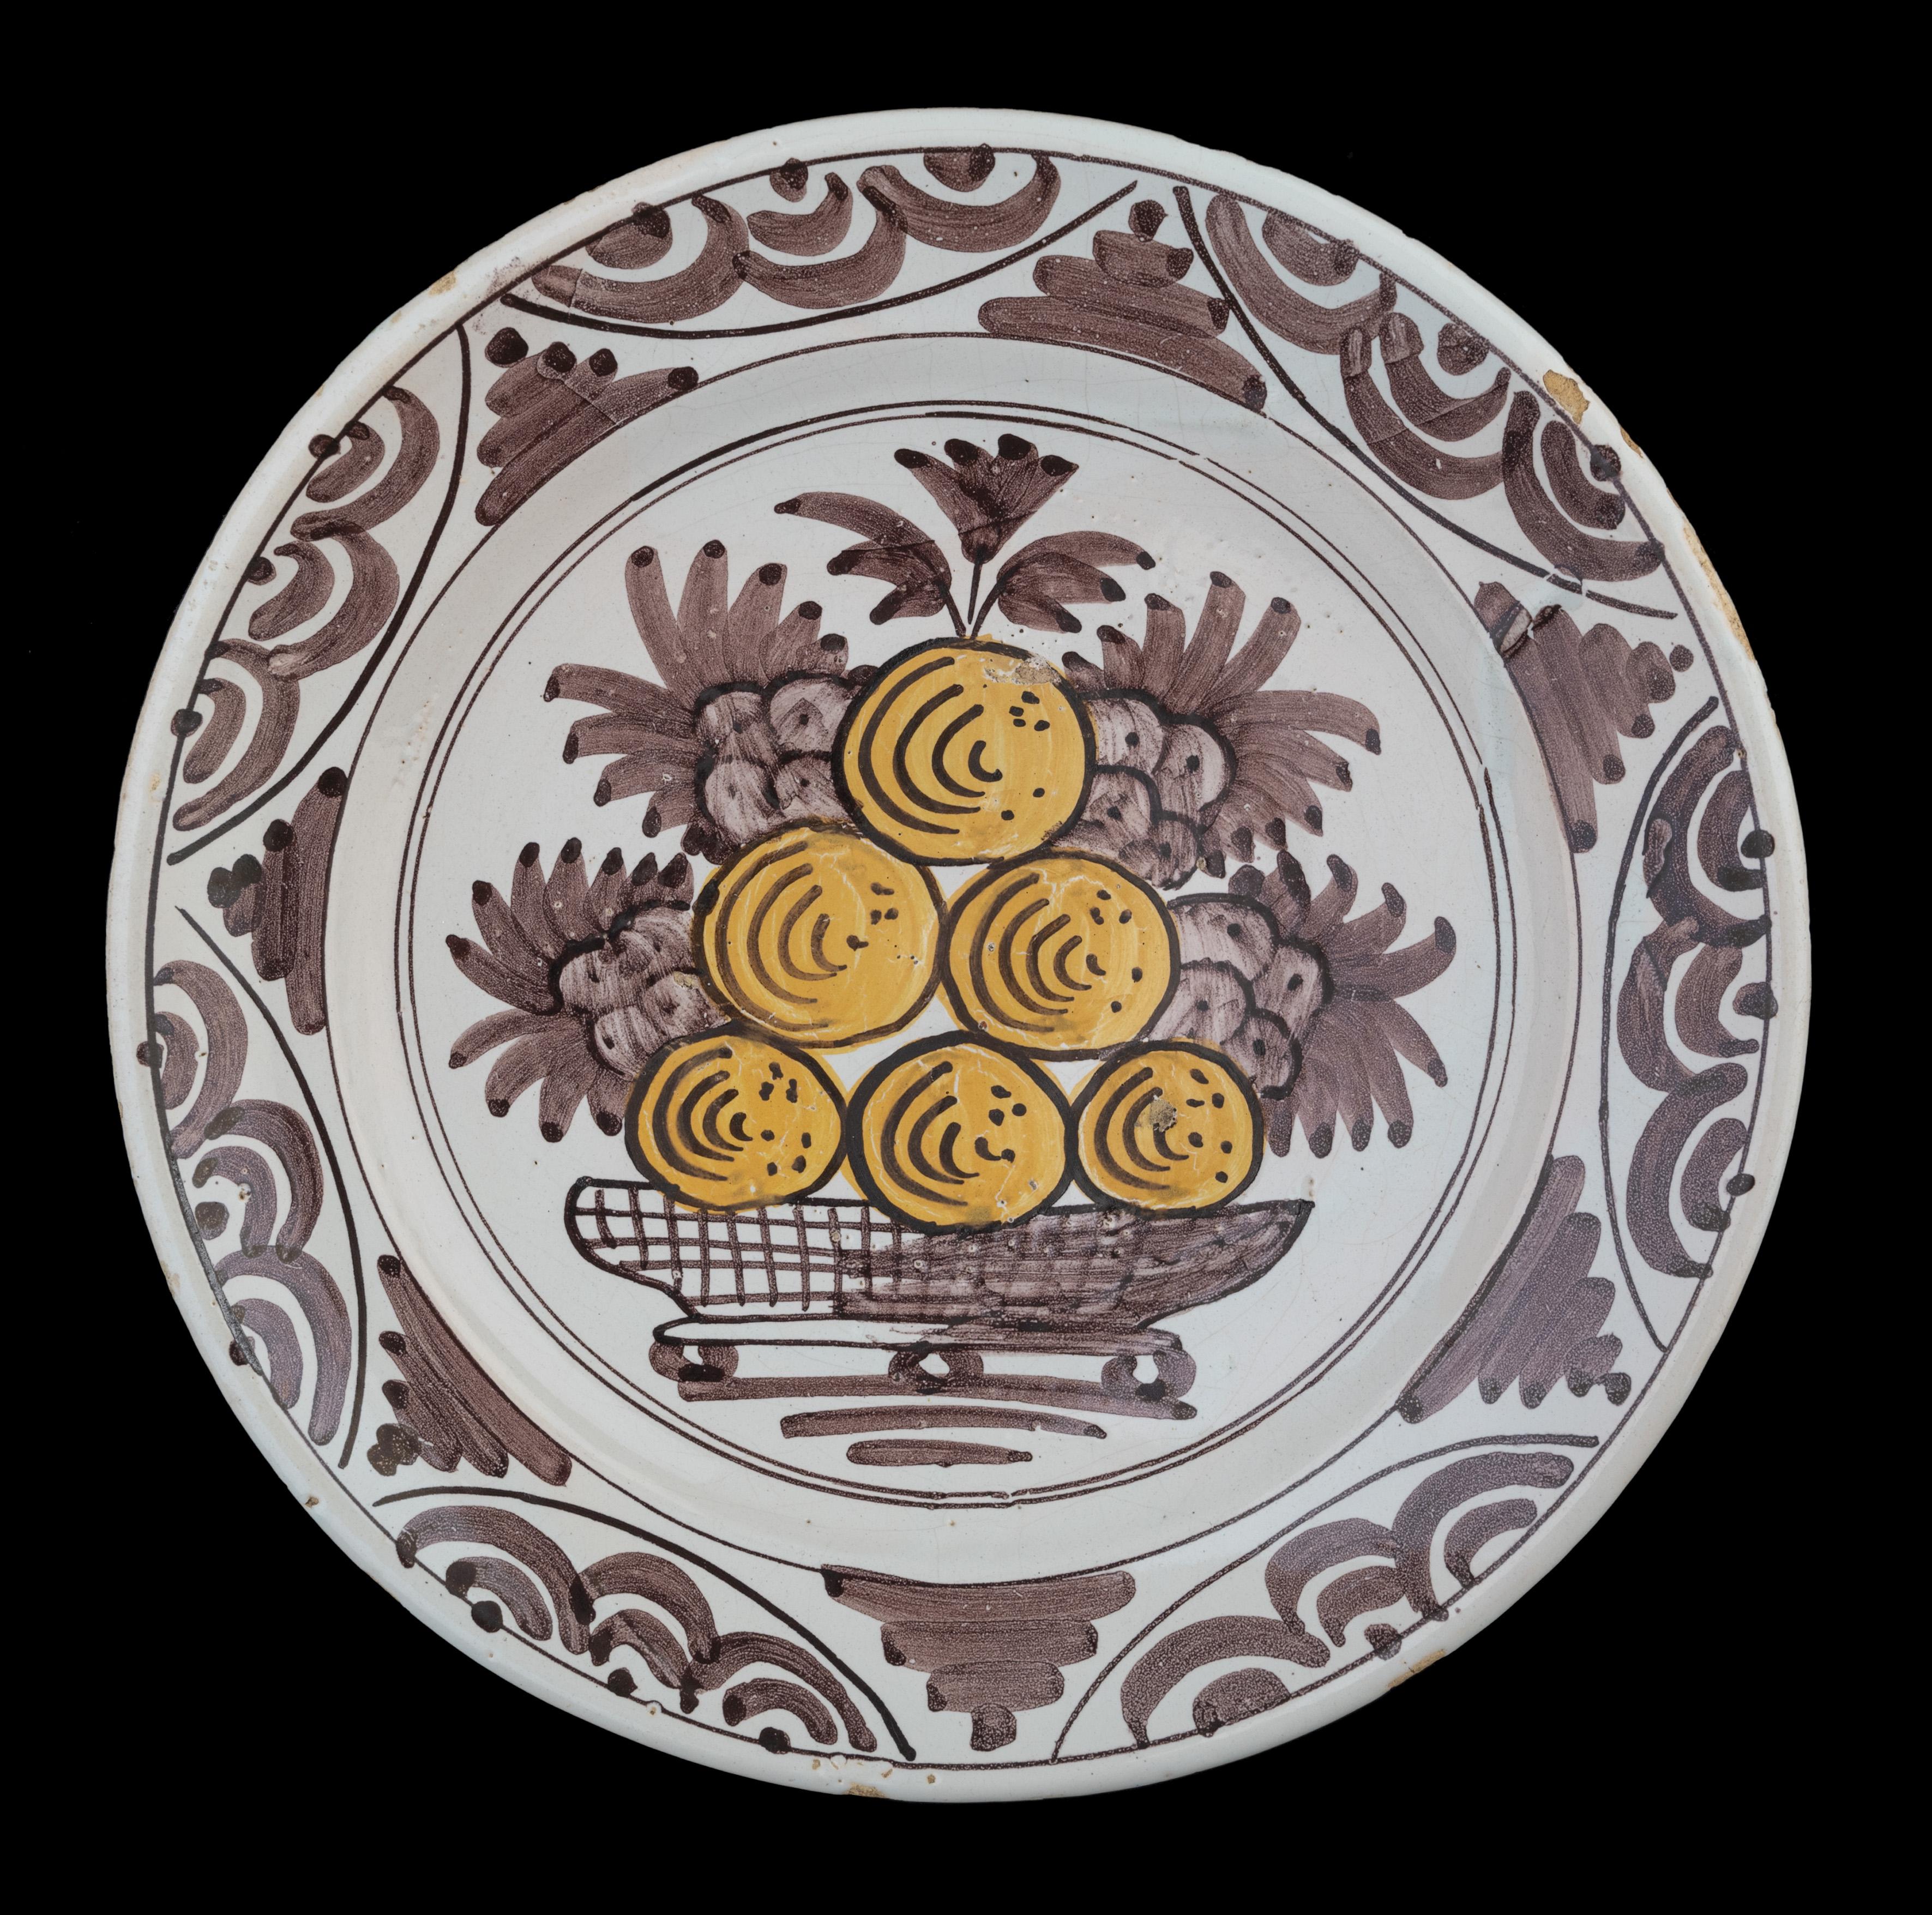 Dish with fruit in purple and yellow The Netherlands, 1660-1700.

The dish has a spreading, slightly raised flange and is painted in purple and yellow with a fruit decor of grapes and apples or oranges, set in a double circle. The well is